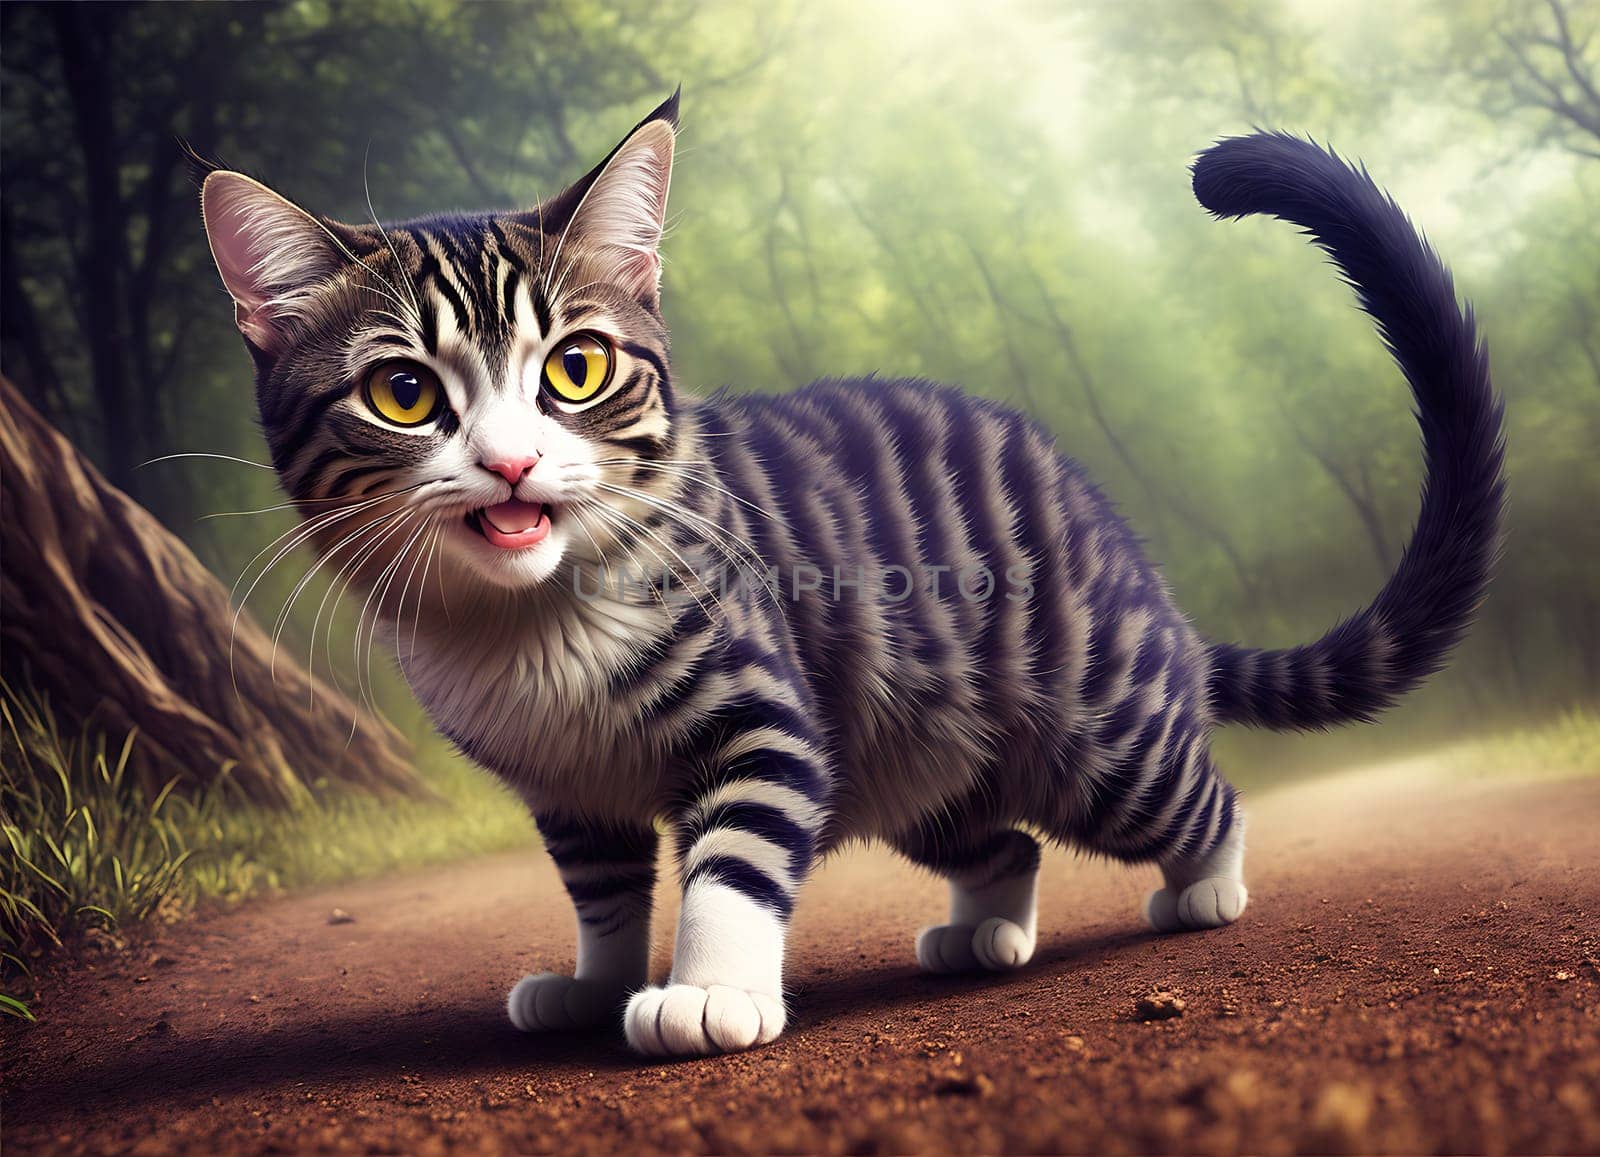 The image shows a striped cat standing on a dirt road in a forest, with its mouth open and its eyes looking ahead.